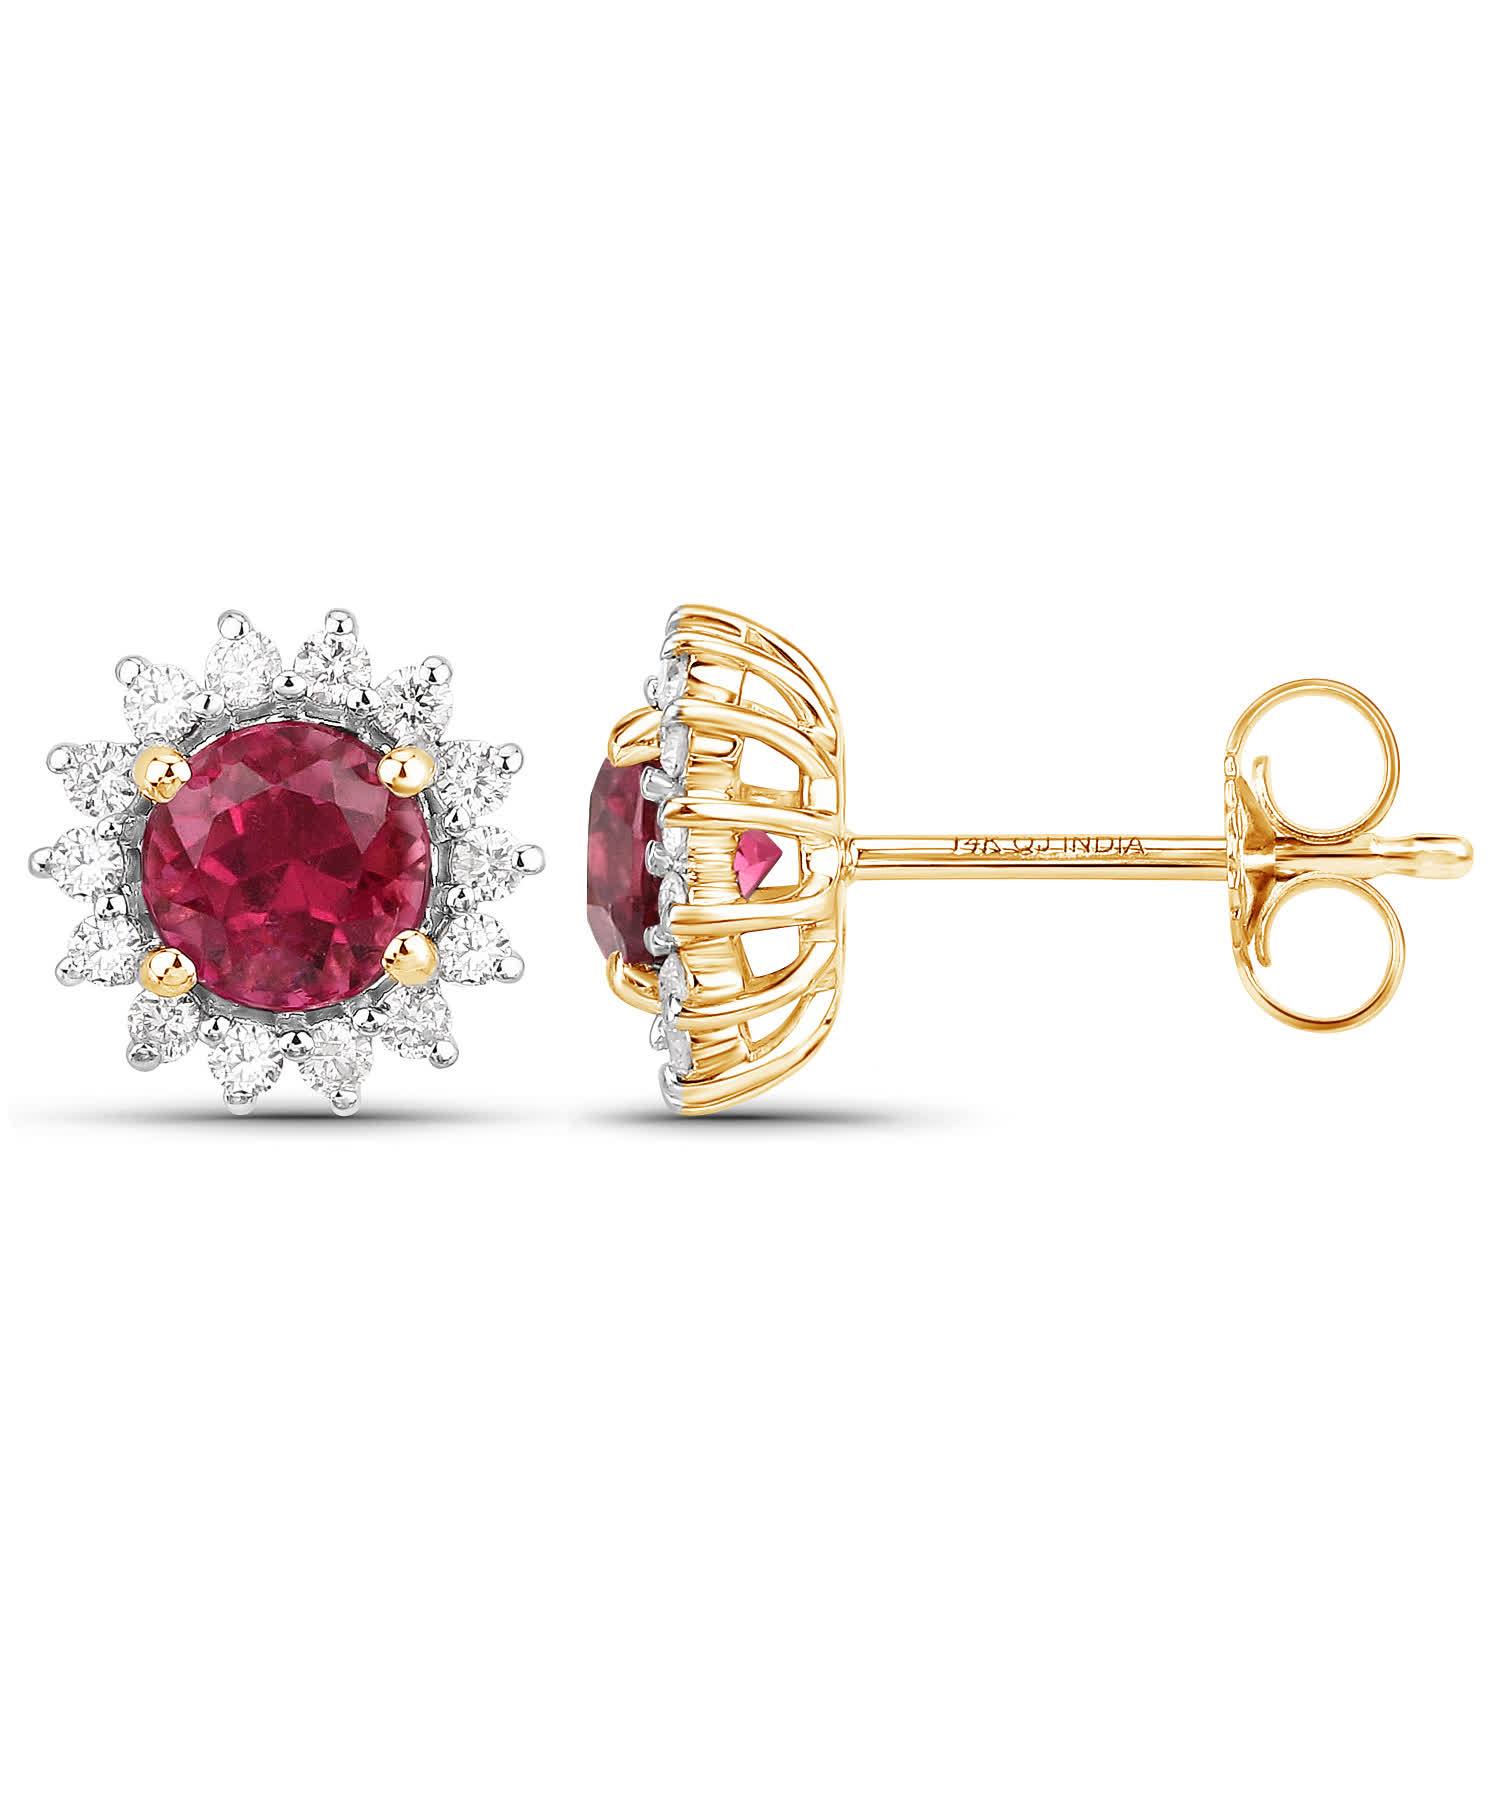 1.24ctw Natural Rubellite and Diamond 14k Gold Flower Stud Earrings View 2